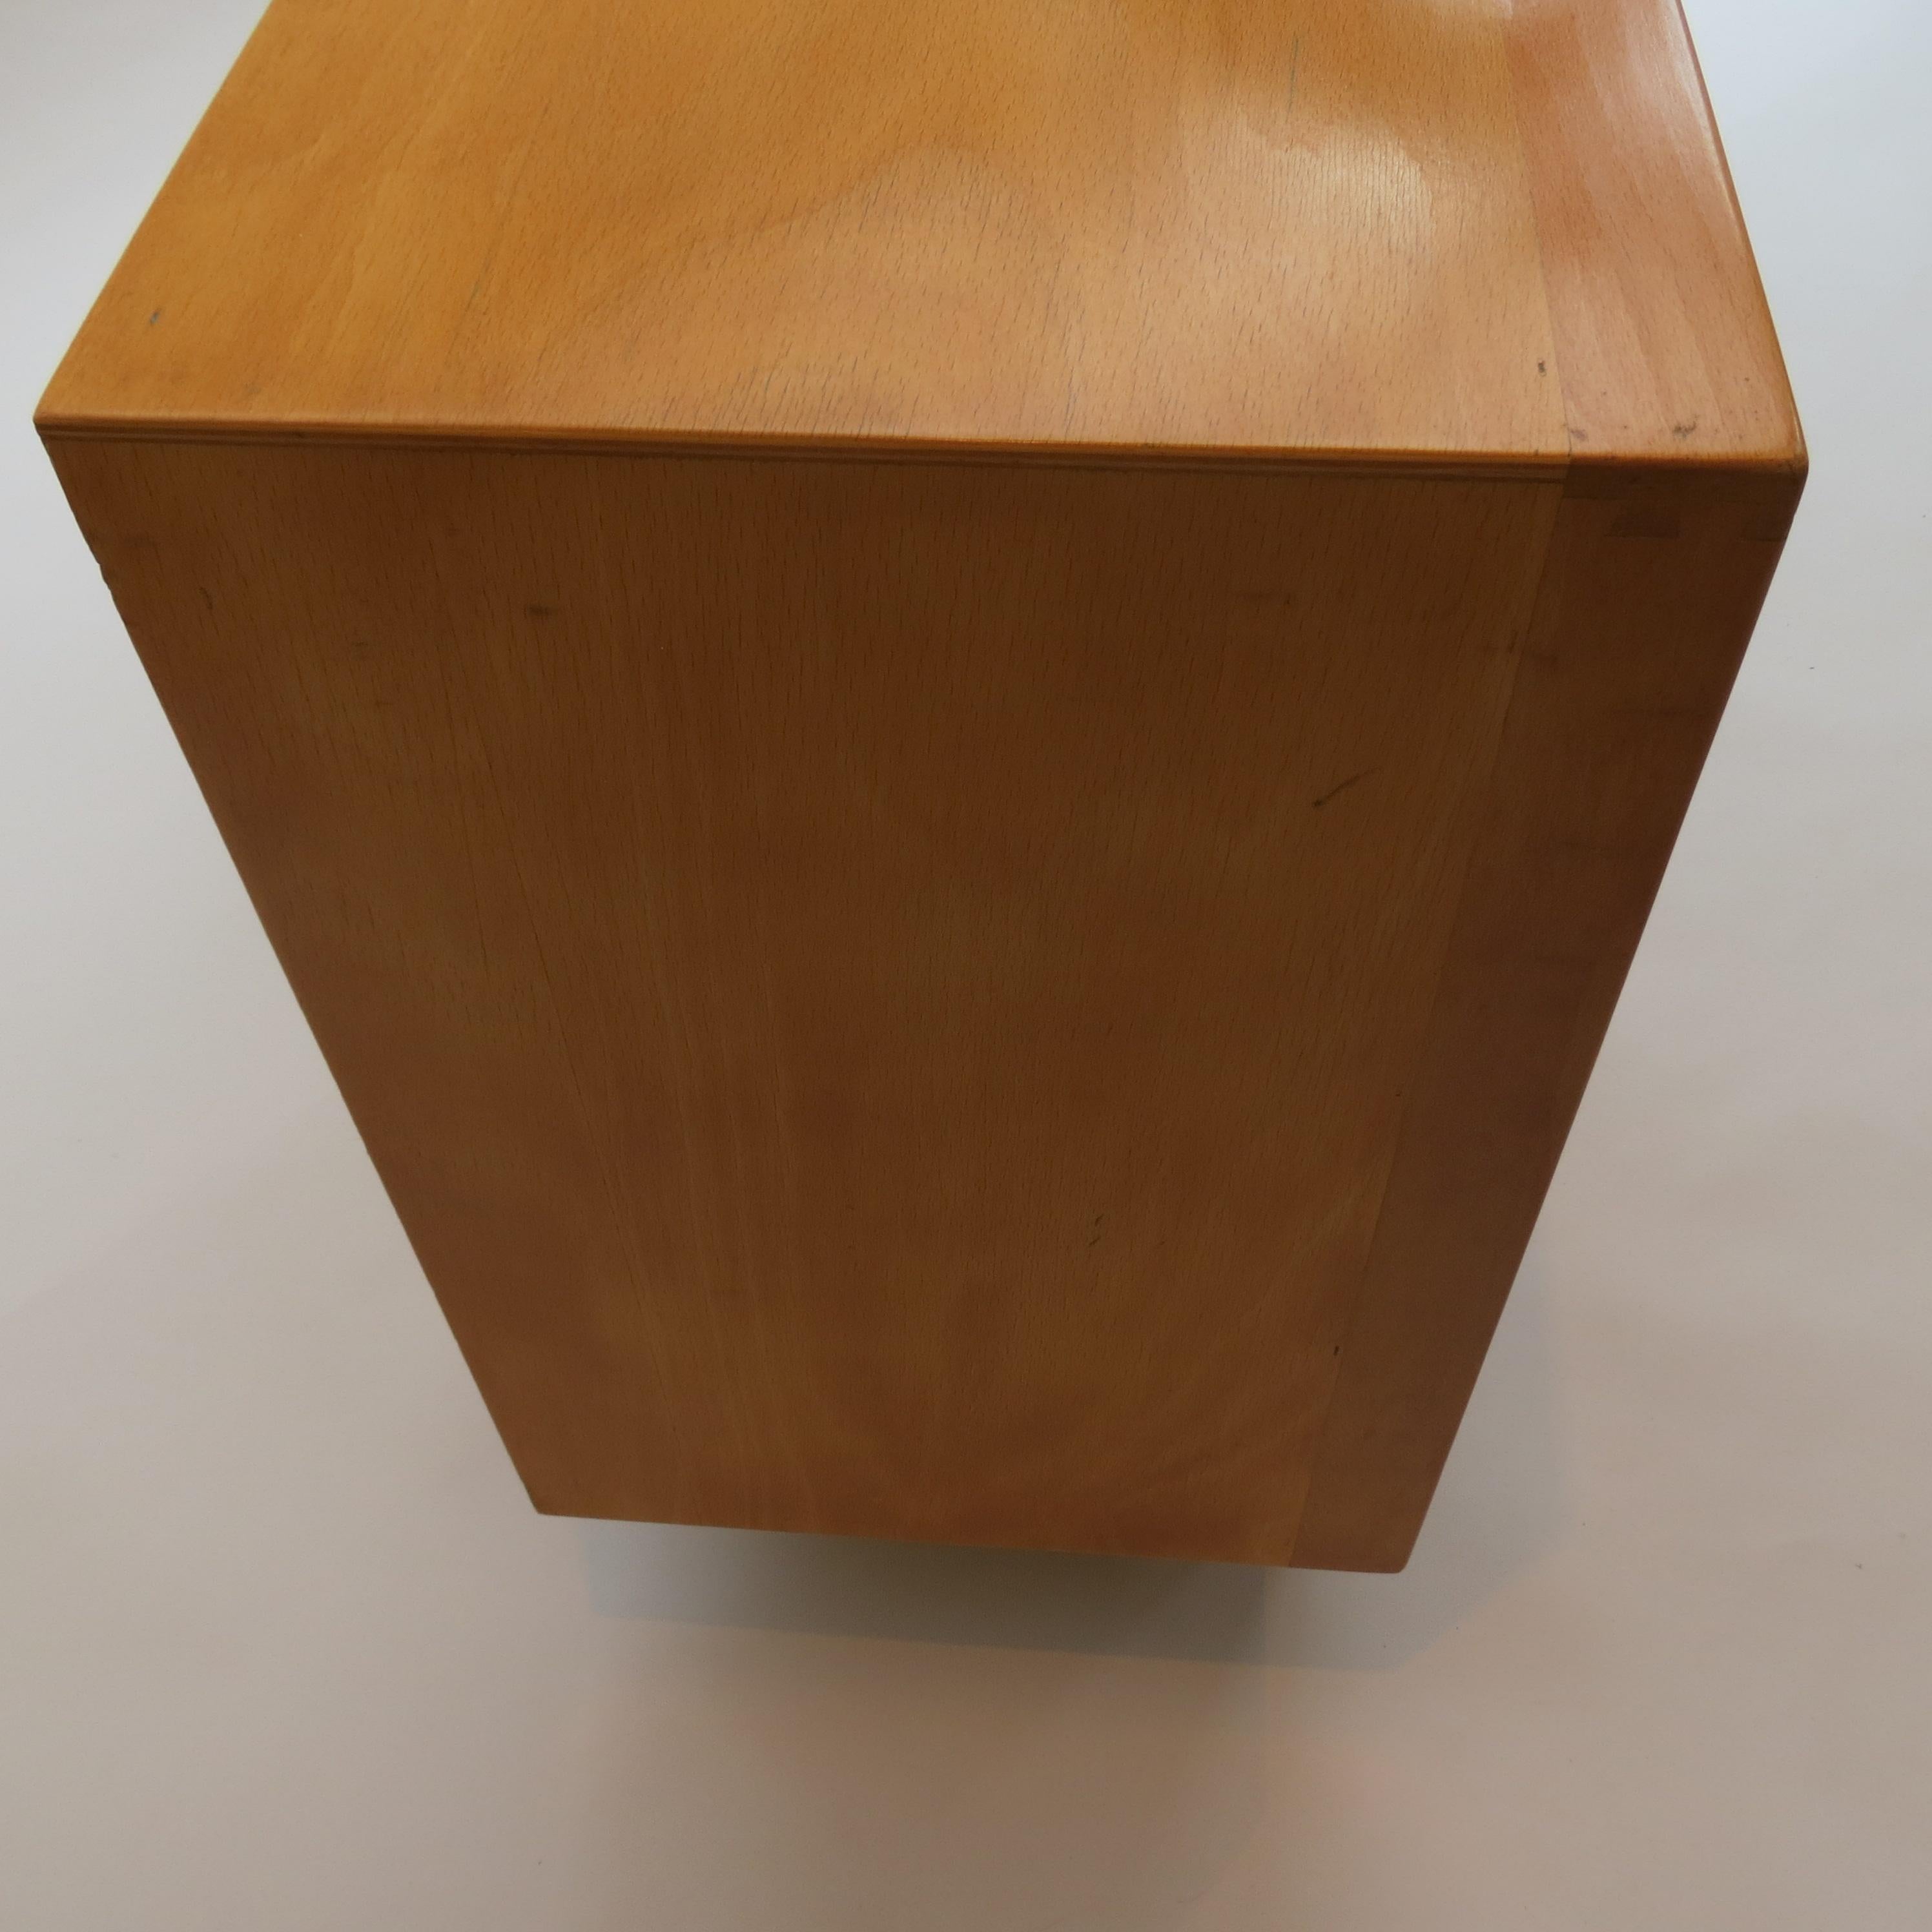 Chest of Drawers by James Leonard for Esavian ESA 1 1